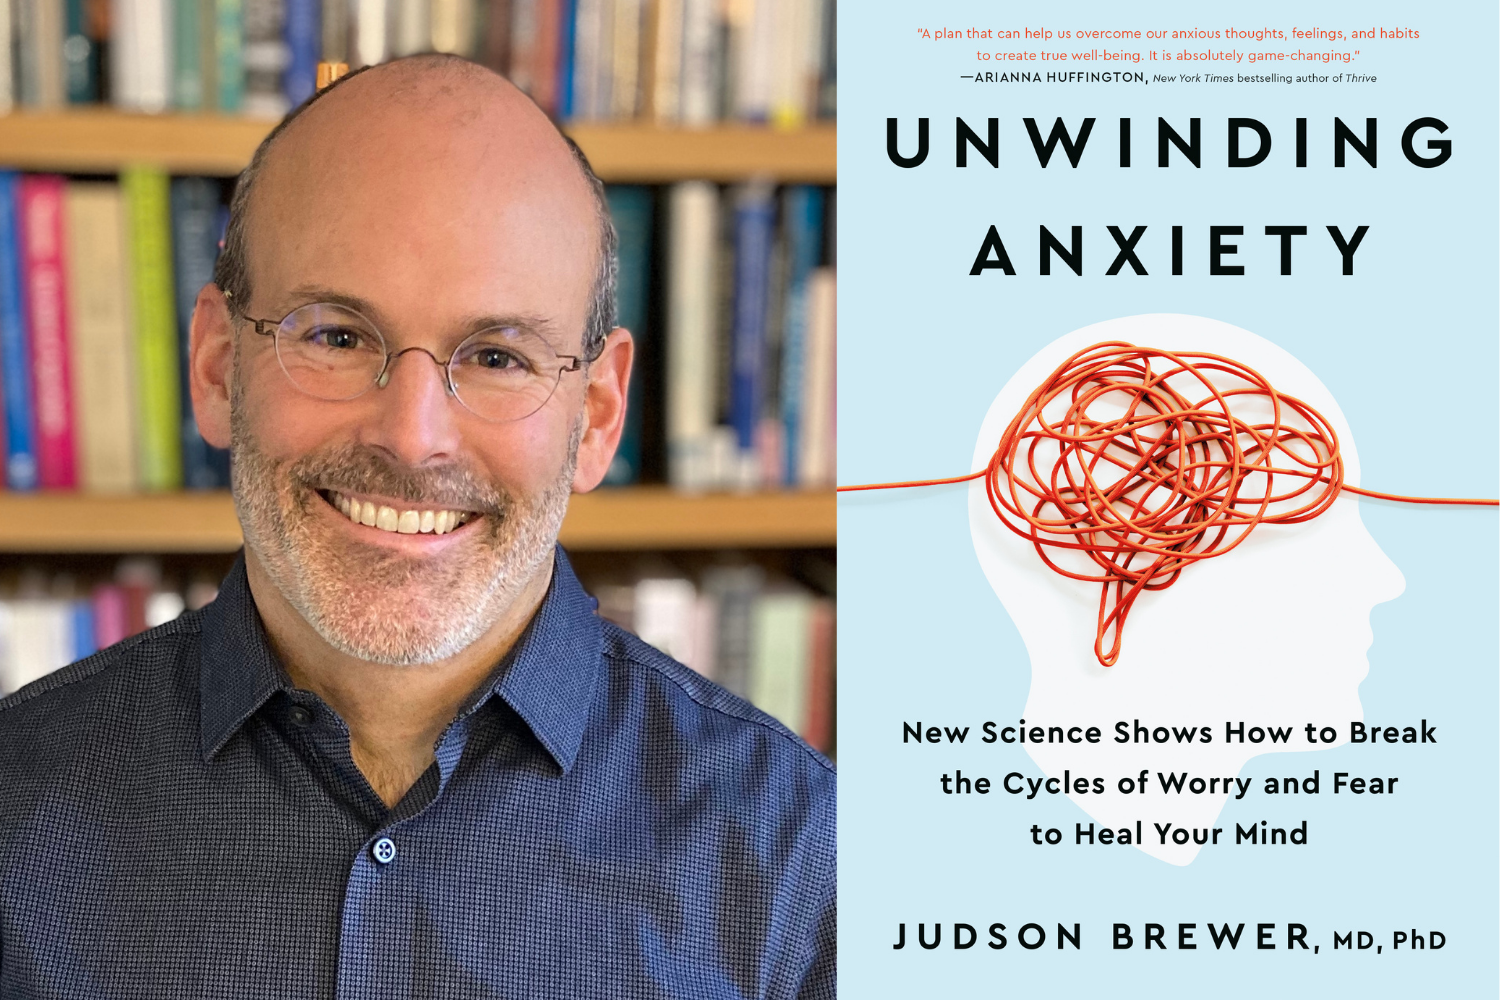 Dr. Judson Brewer and the cover of his book, “Unwinding Anxiety"